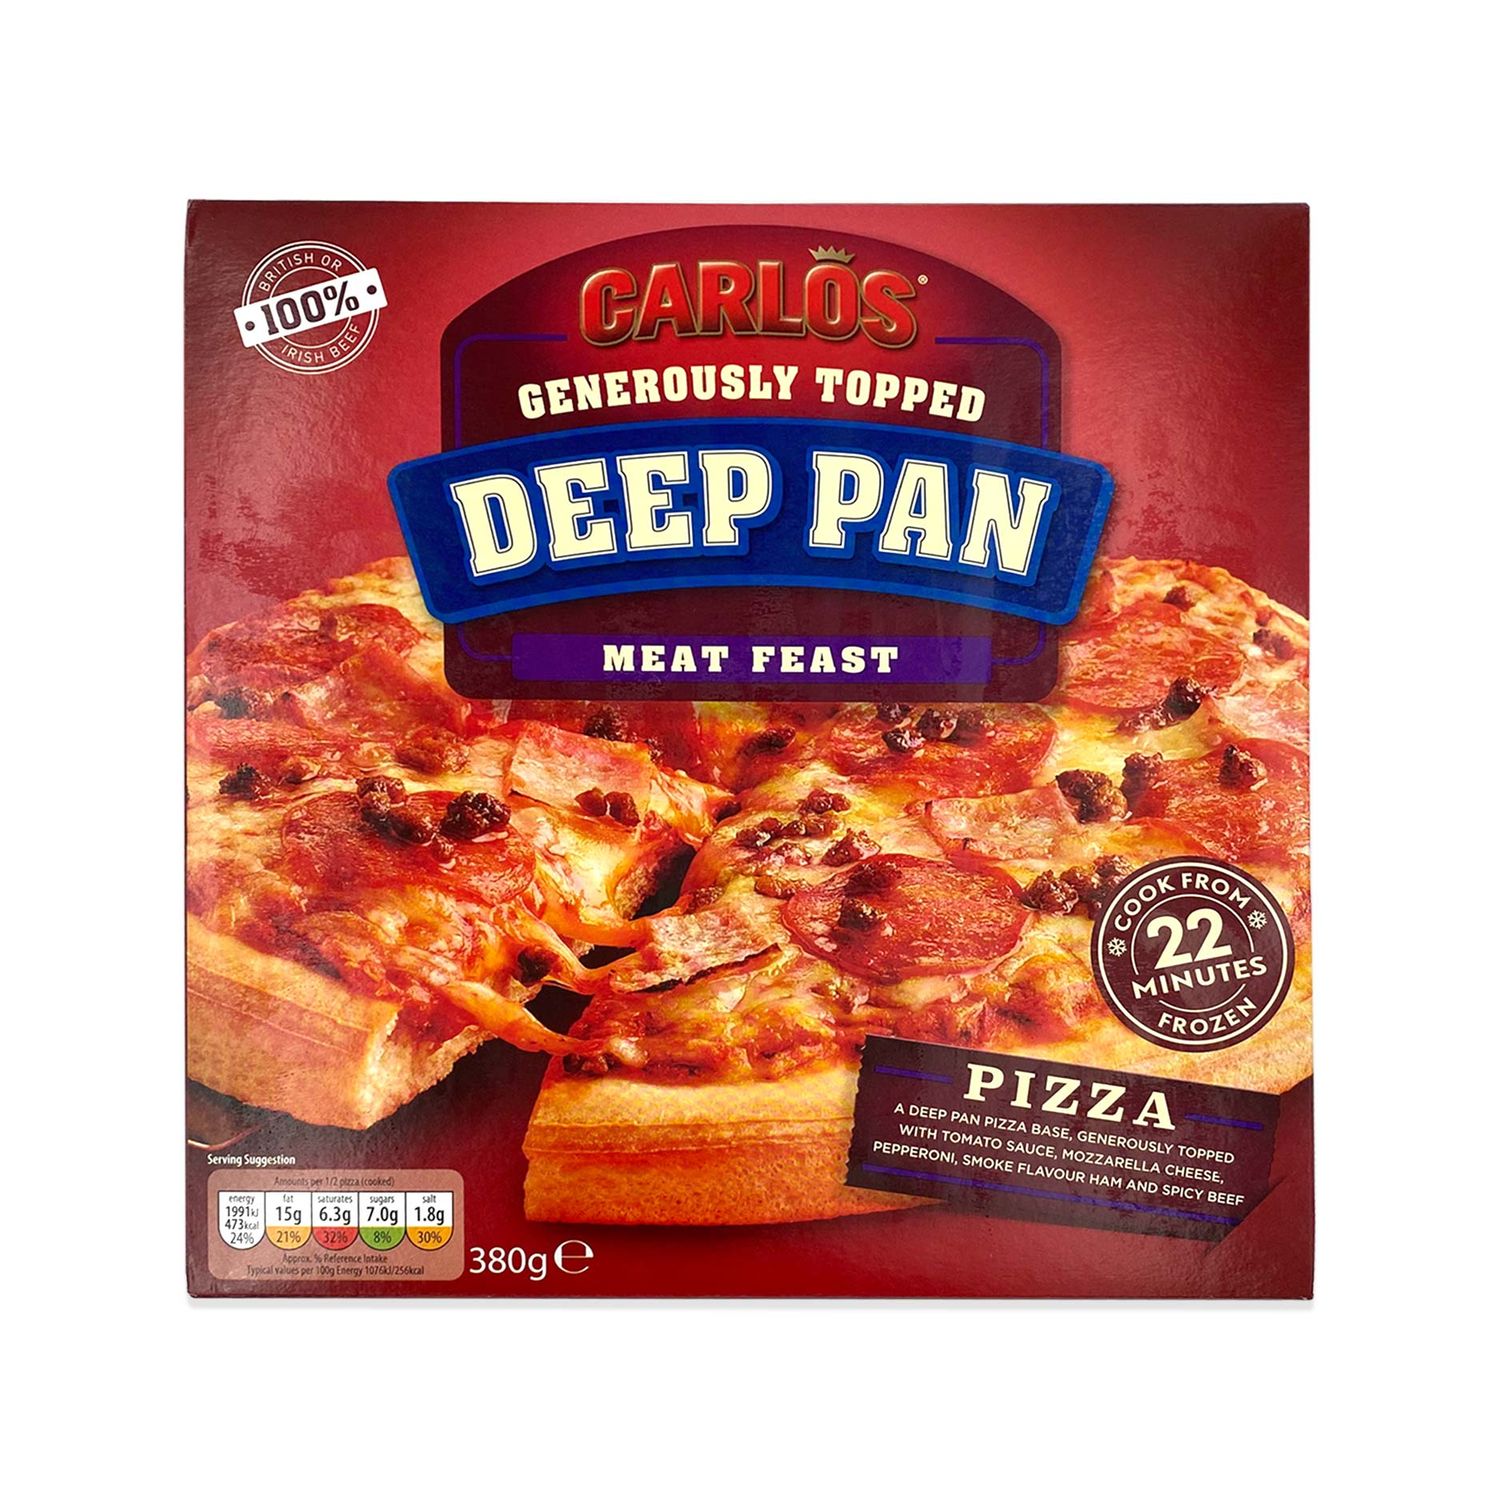 Carlos Generously Topped Deep Pan Meat Feast Pizza 380g ALDI